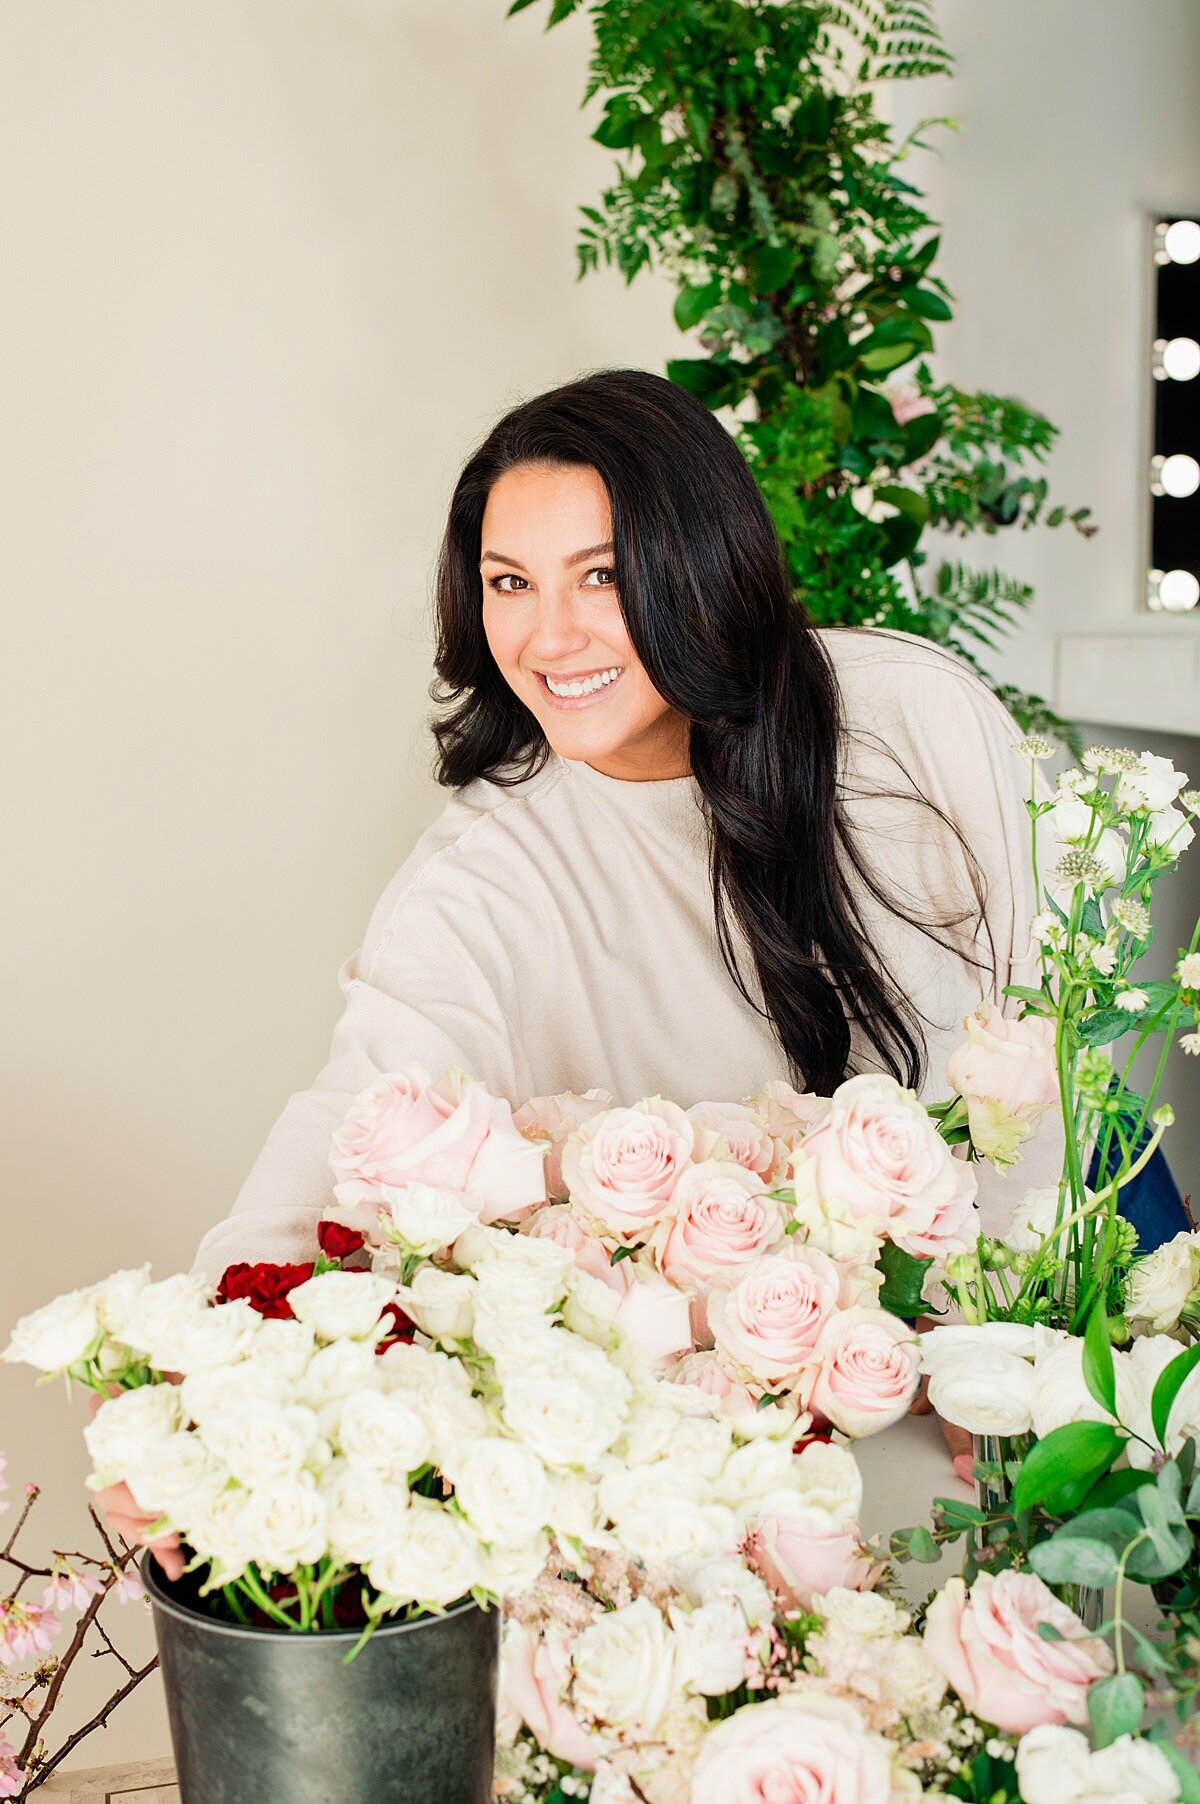 Florist wearing a cream sweater selecting flowers and smiling at the camera